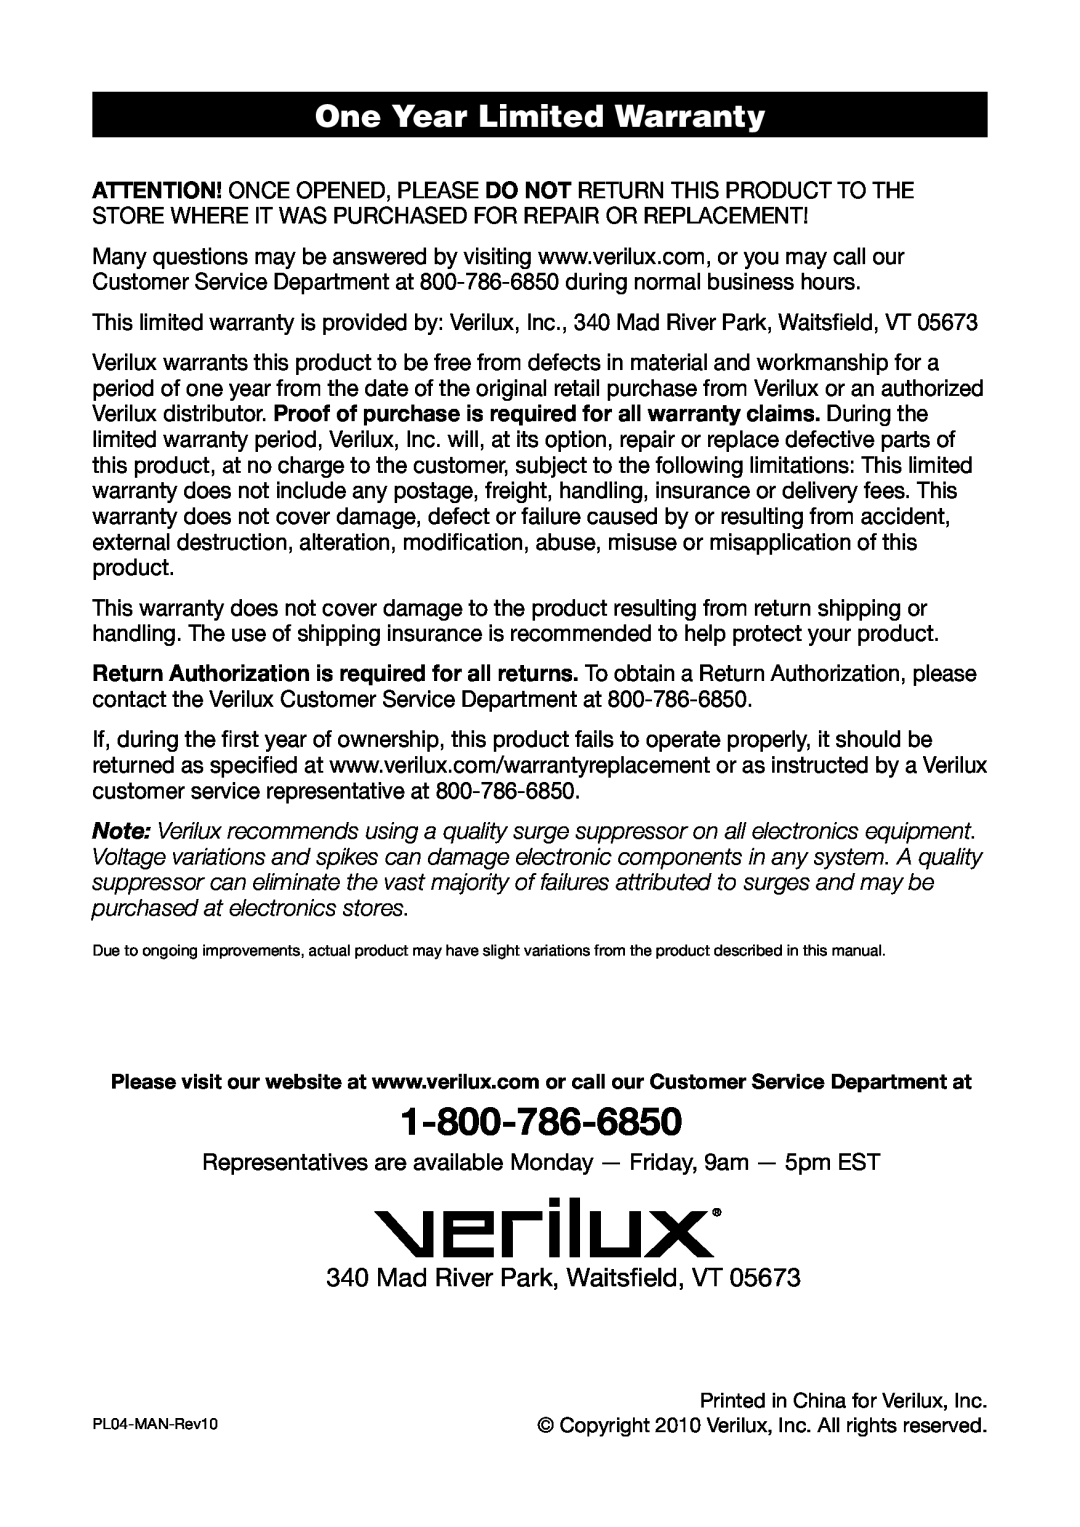 Verilux PL04 manual One Year Limited Warranty, Mad River Park, Waitsfield, VT 